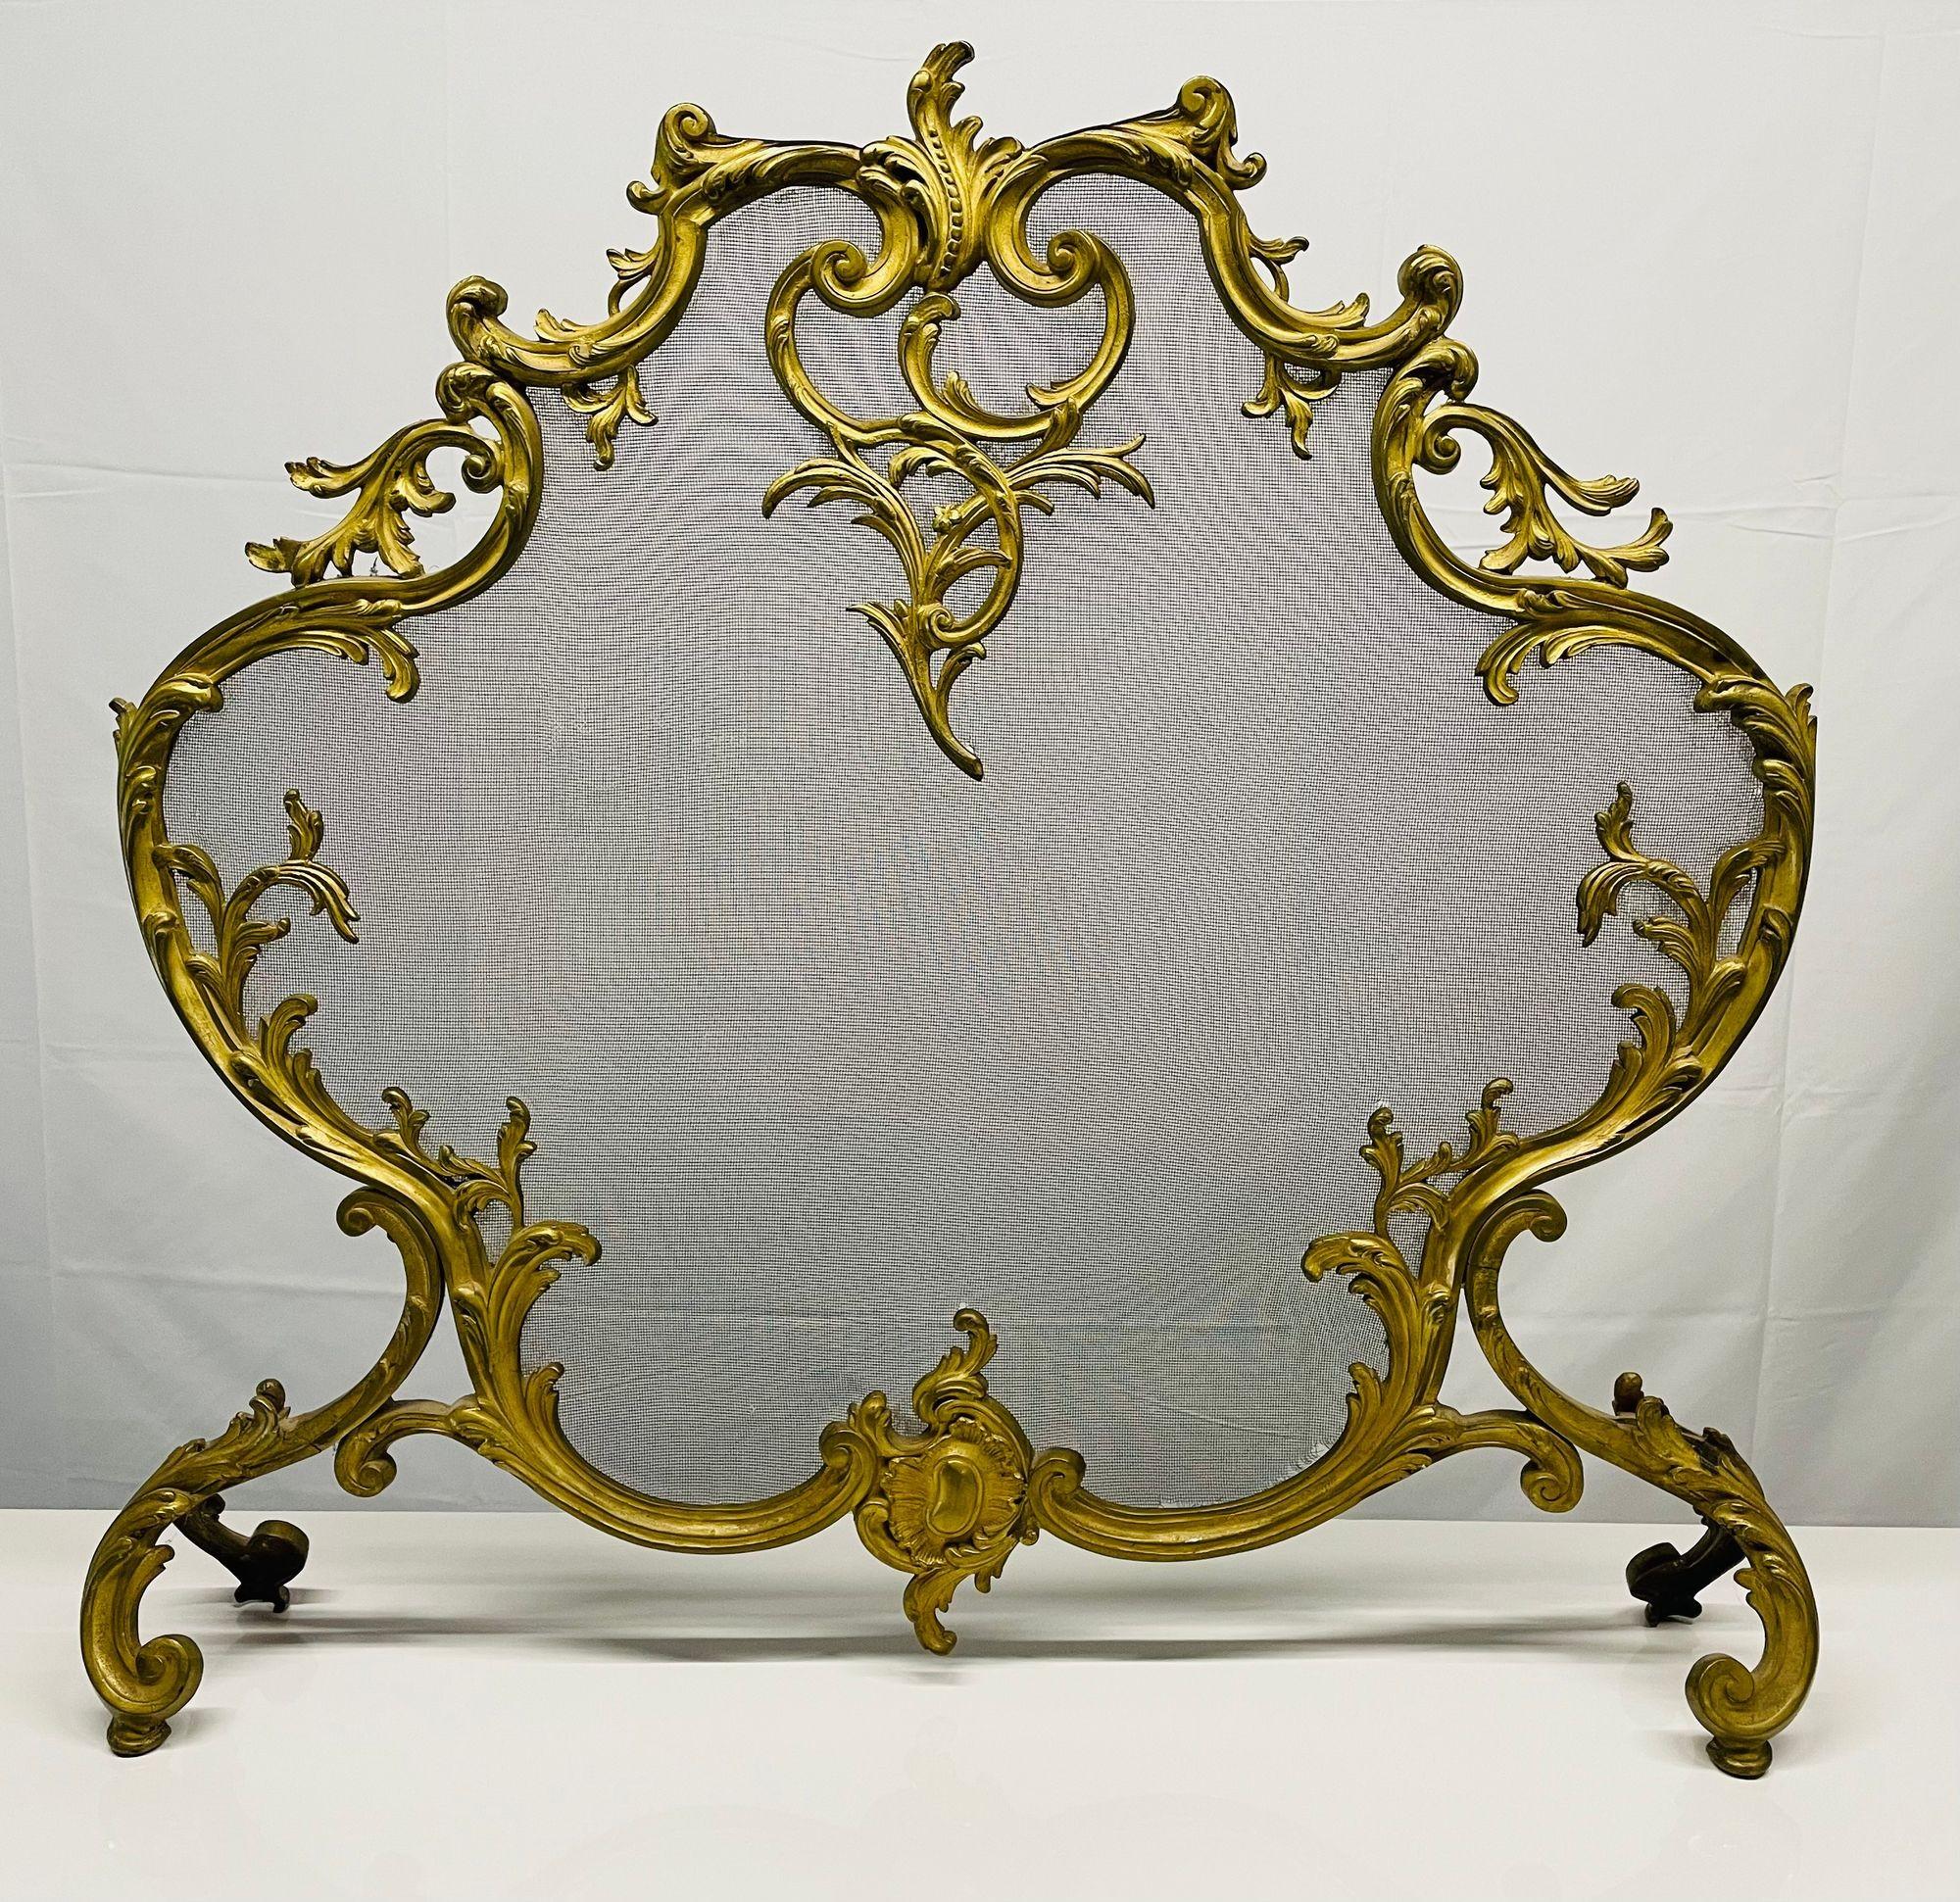 Antique French Louis XVI Style Dore' bronze fire screen, steel, mesh
 
A fine crafted dore' bronze fire screen in the Louis XVI Fashion. The whole of shell and scroll deisgn. 
 
Measures: 32 inches high 34 inches wide 6 inches deep at the